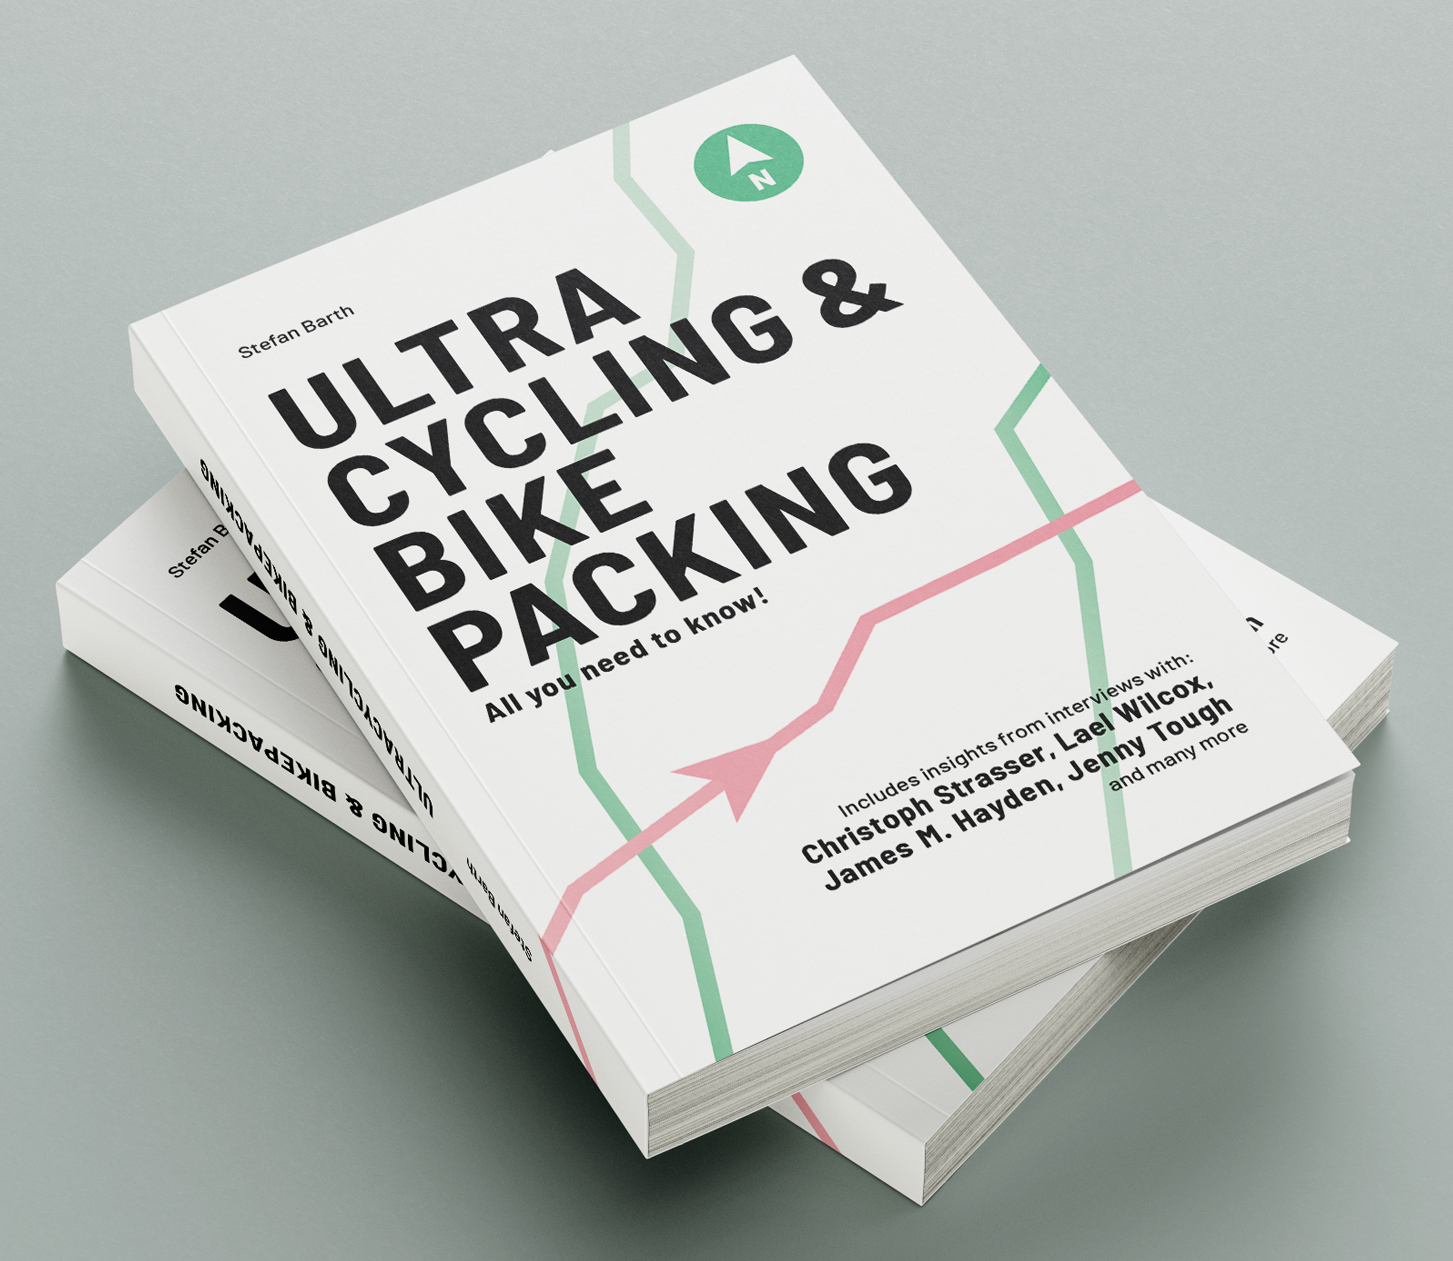 Book PAPERBACK "Ultracycling & Bikepacking - All you need to know".  From Stefan Barth // ENGLISH Edition